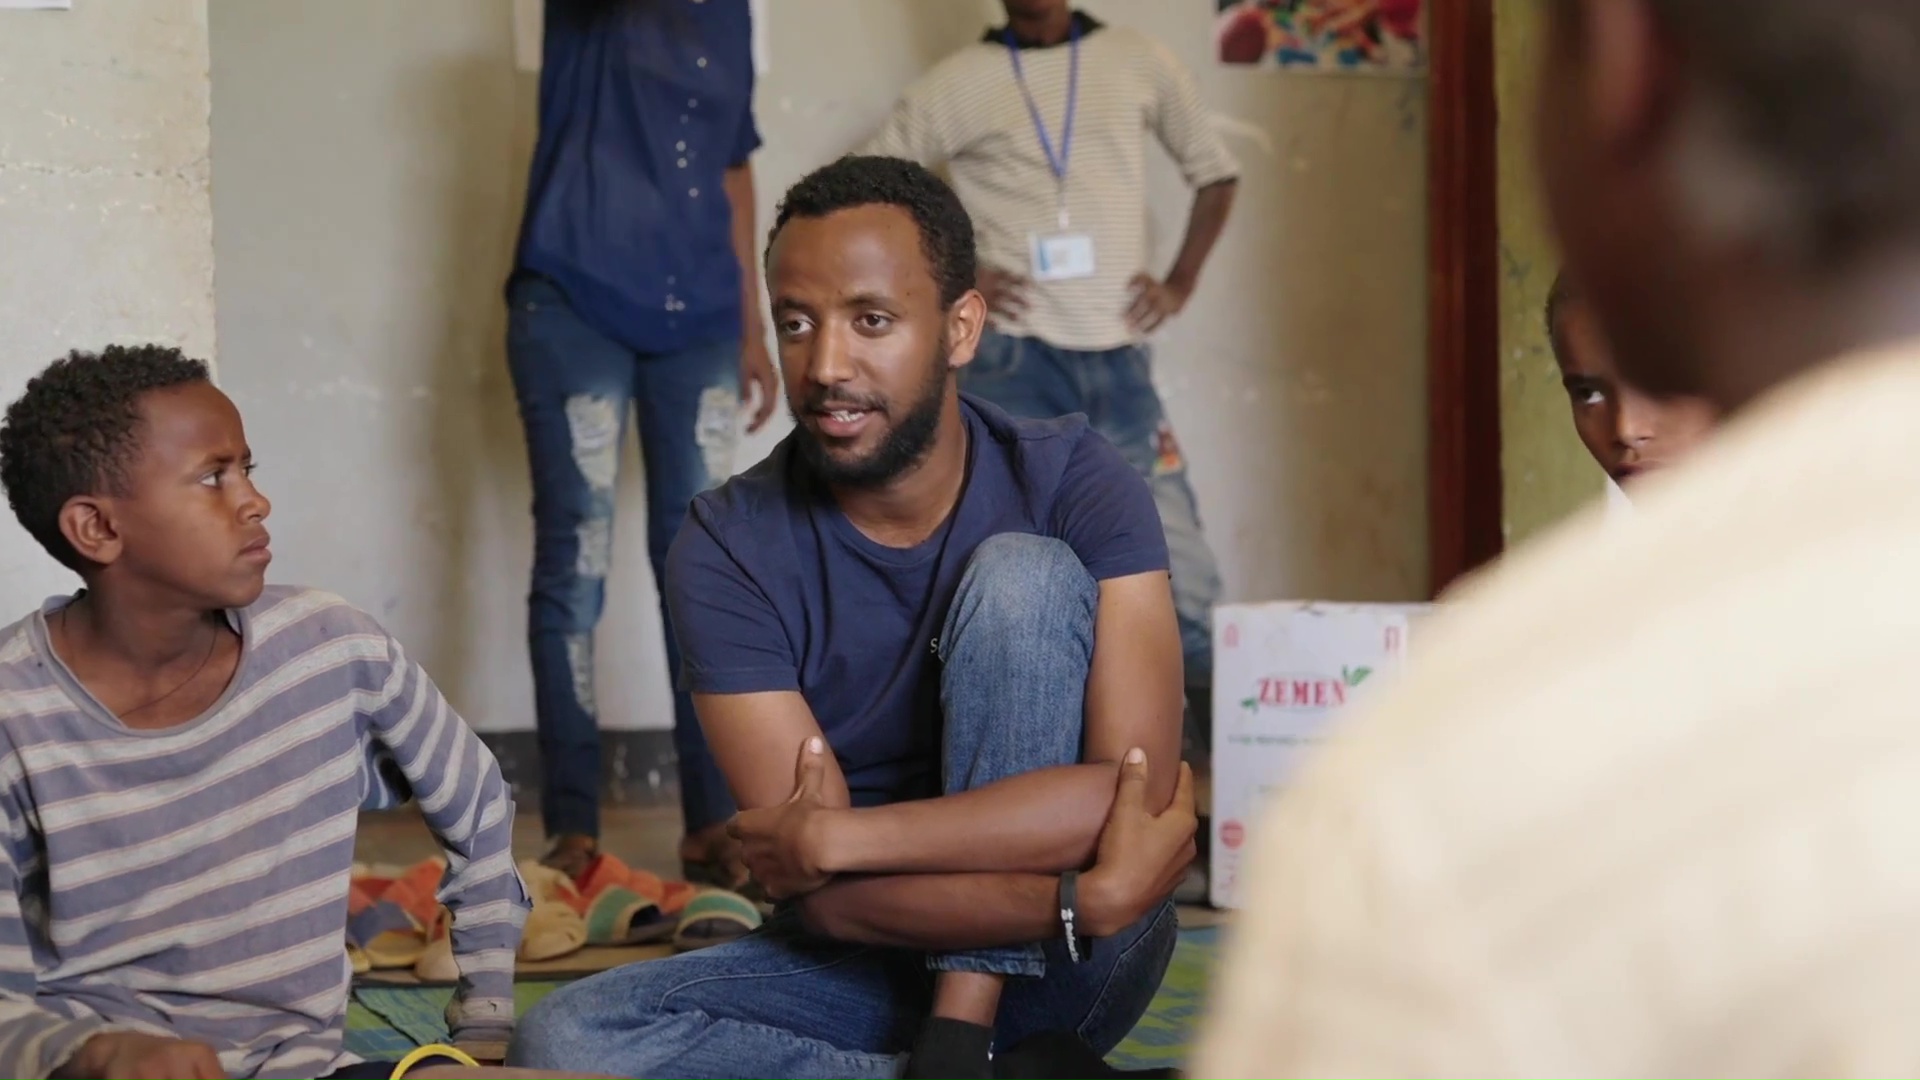 The Samaritan’s Purse project Tesfa for Tigray has created a safe haven for children who have fled ongoing conflict in Ethiopia.